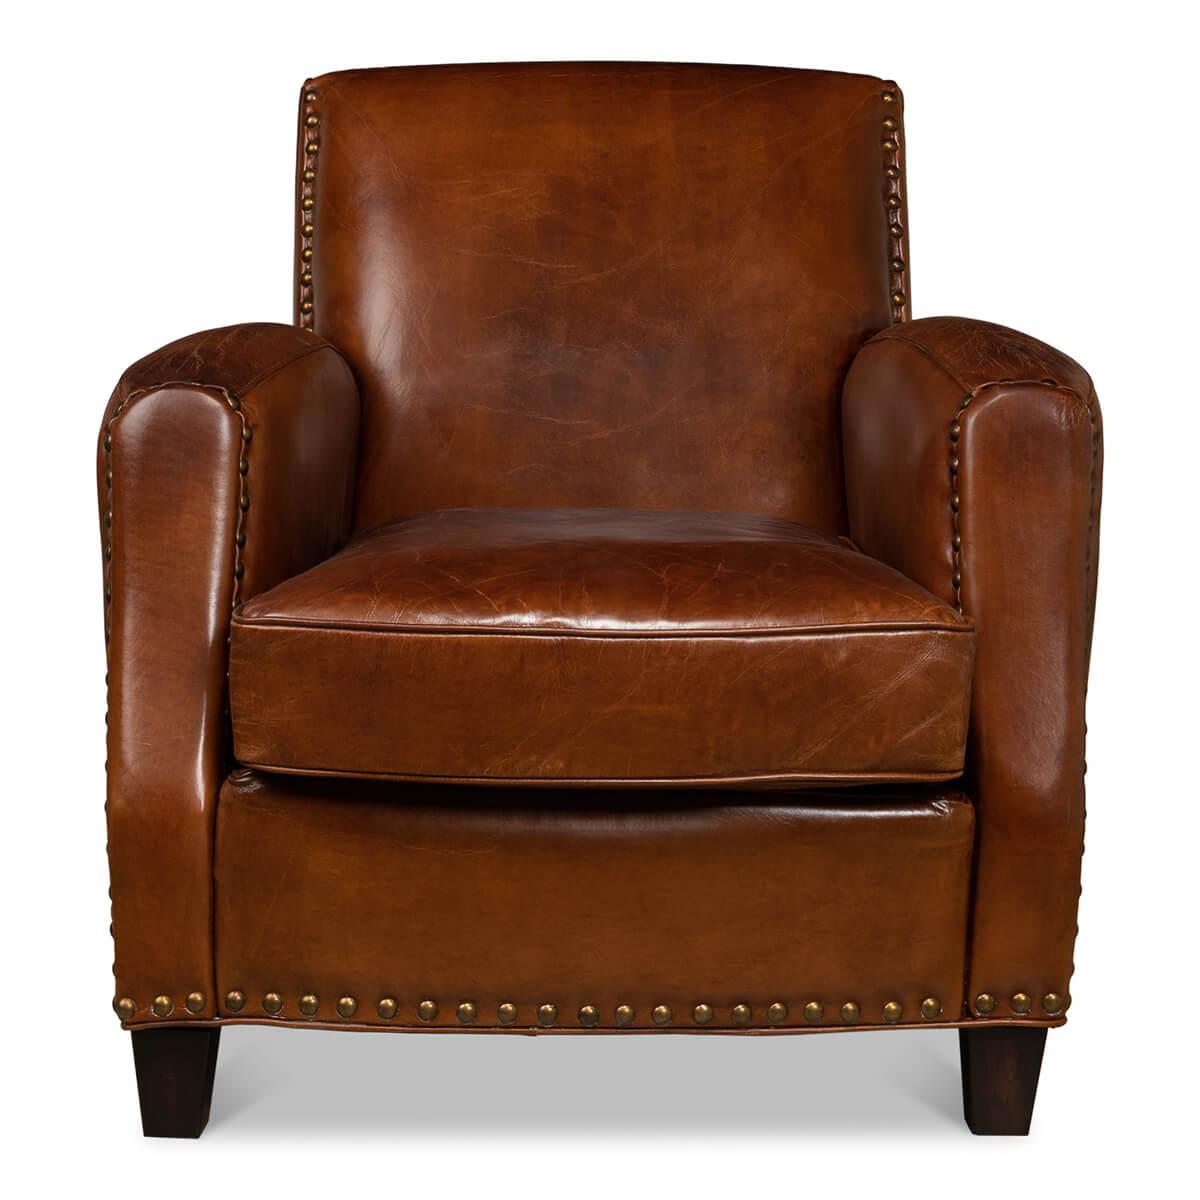 A Classic leather armchair with top-grain Havane brown color leather, with padded cushion and backrest, large nailhead details and square tapered legs.

Dimensions: 32